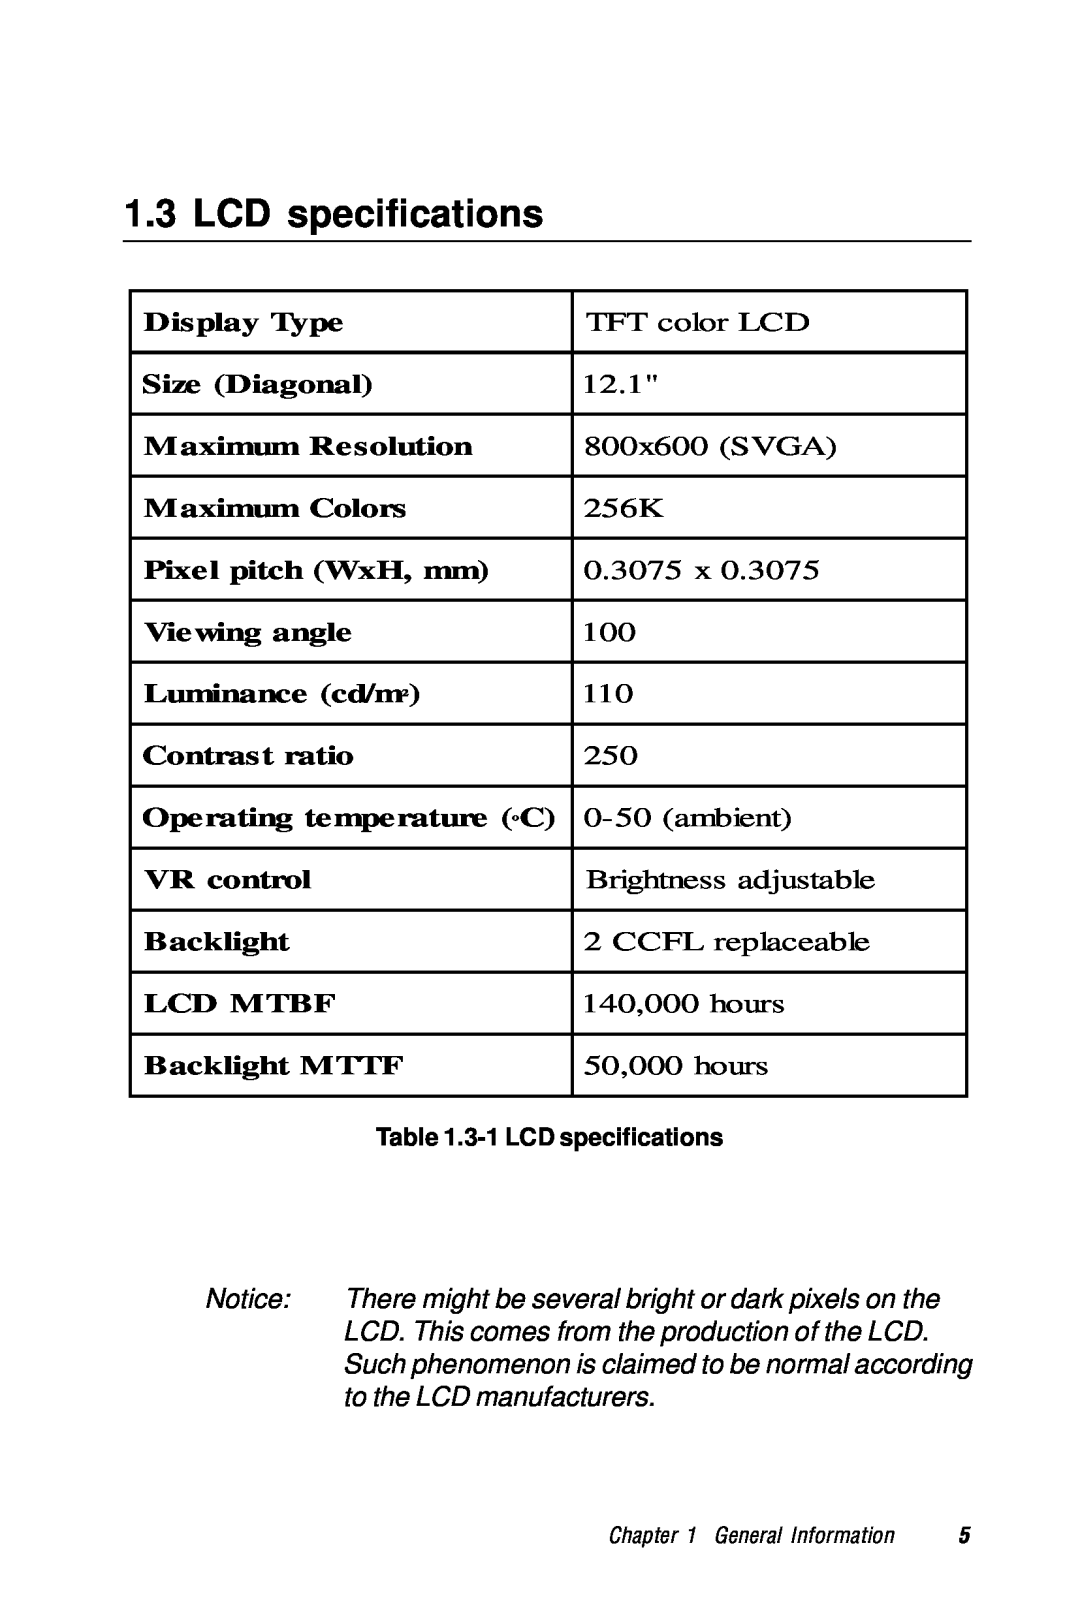 Advantech TPC-1260 manual LCD specifications, There might be several bright or dark pixels on the, to the LCD manufacturers 